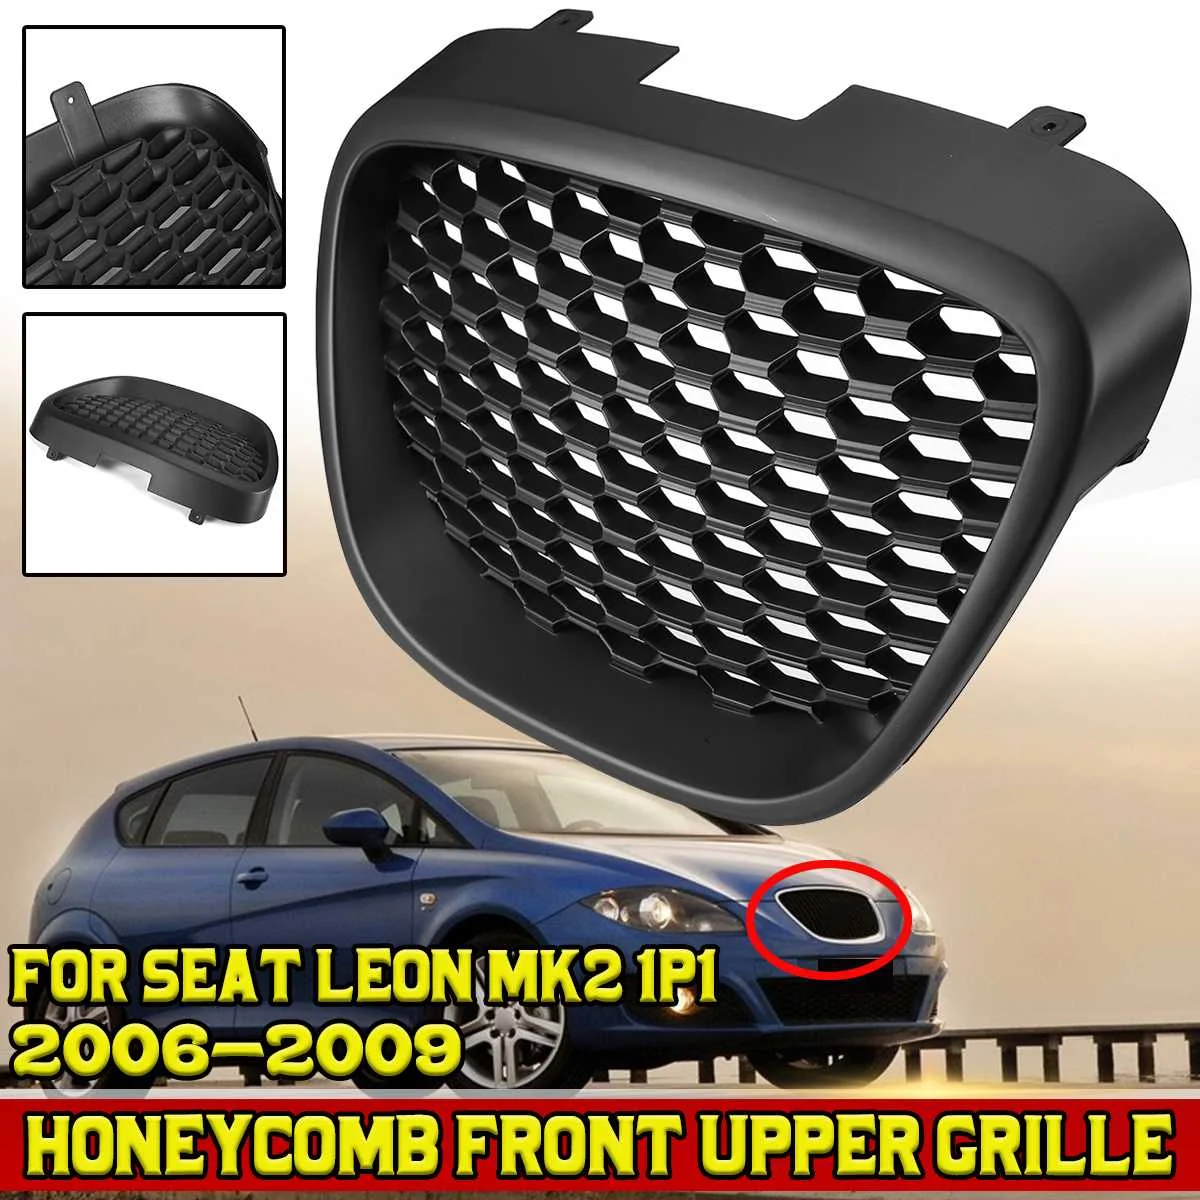 

New Car Front Upper Grille Grill Honeycomb Mesh For SEAT LEON MK2 1P1 2006-2009 BPPPGR36 Front Middle Racing Grills